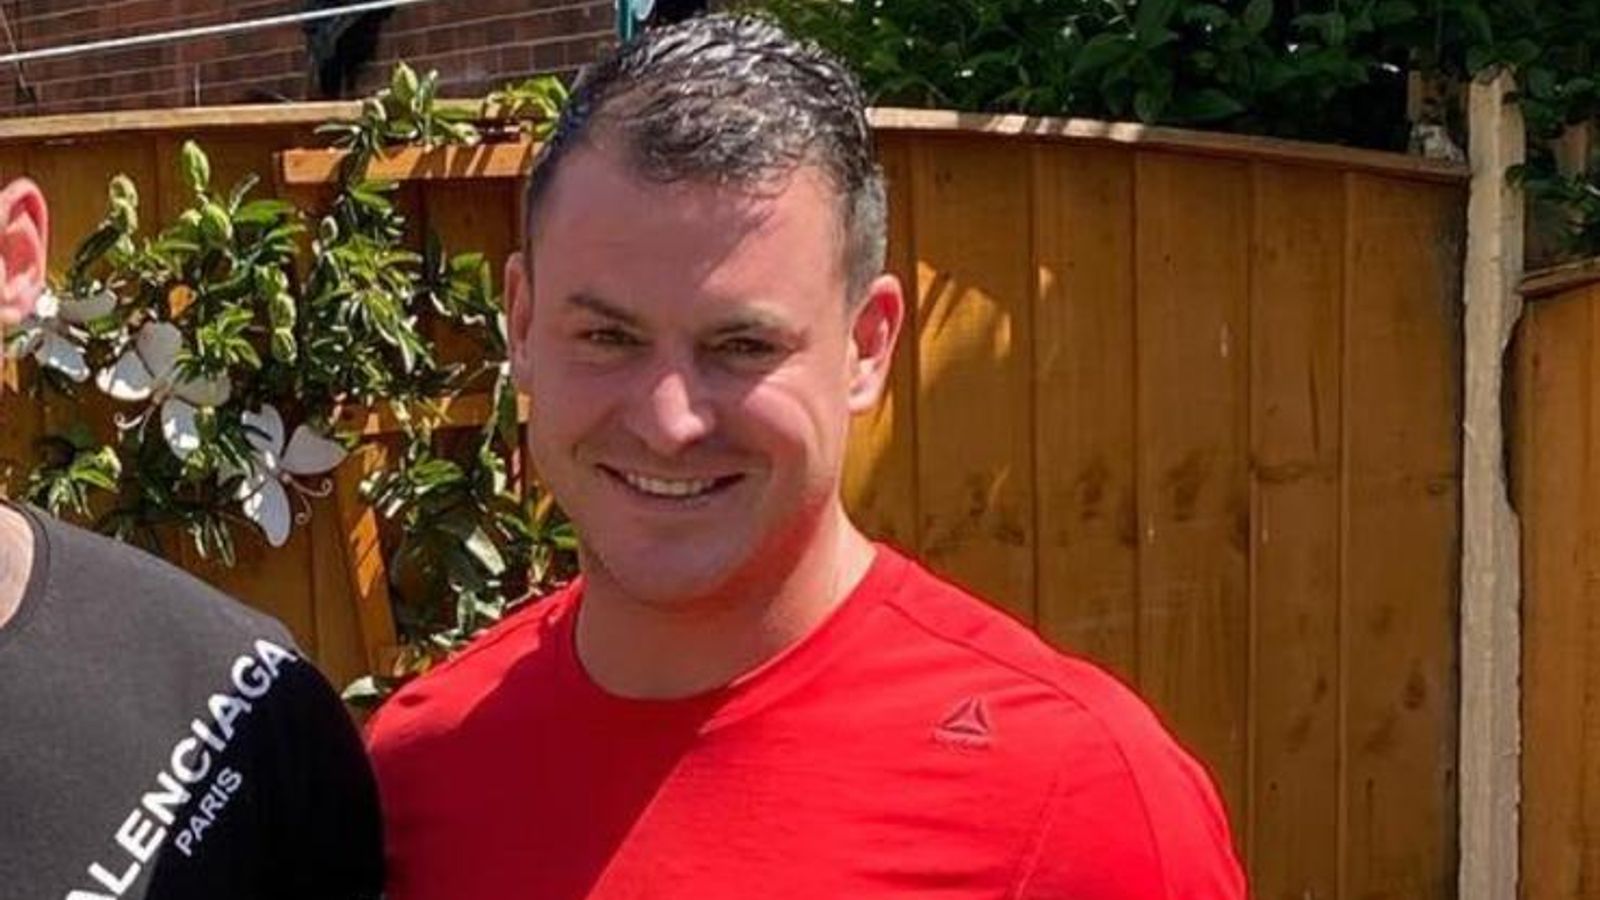 Steven McMyler was fatally kicked in the head while being attacked in the gardens of Wigan Parish Church shortly before 7.50pm on Thursday 6 August 2020.